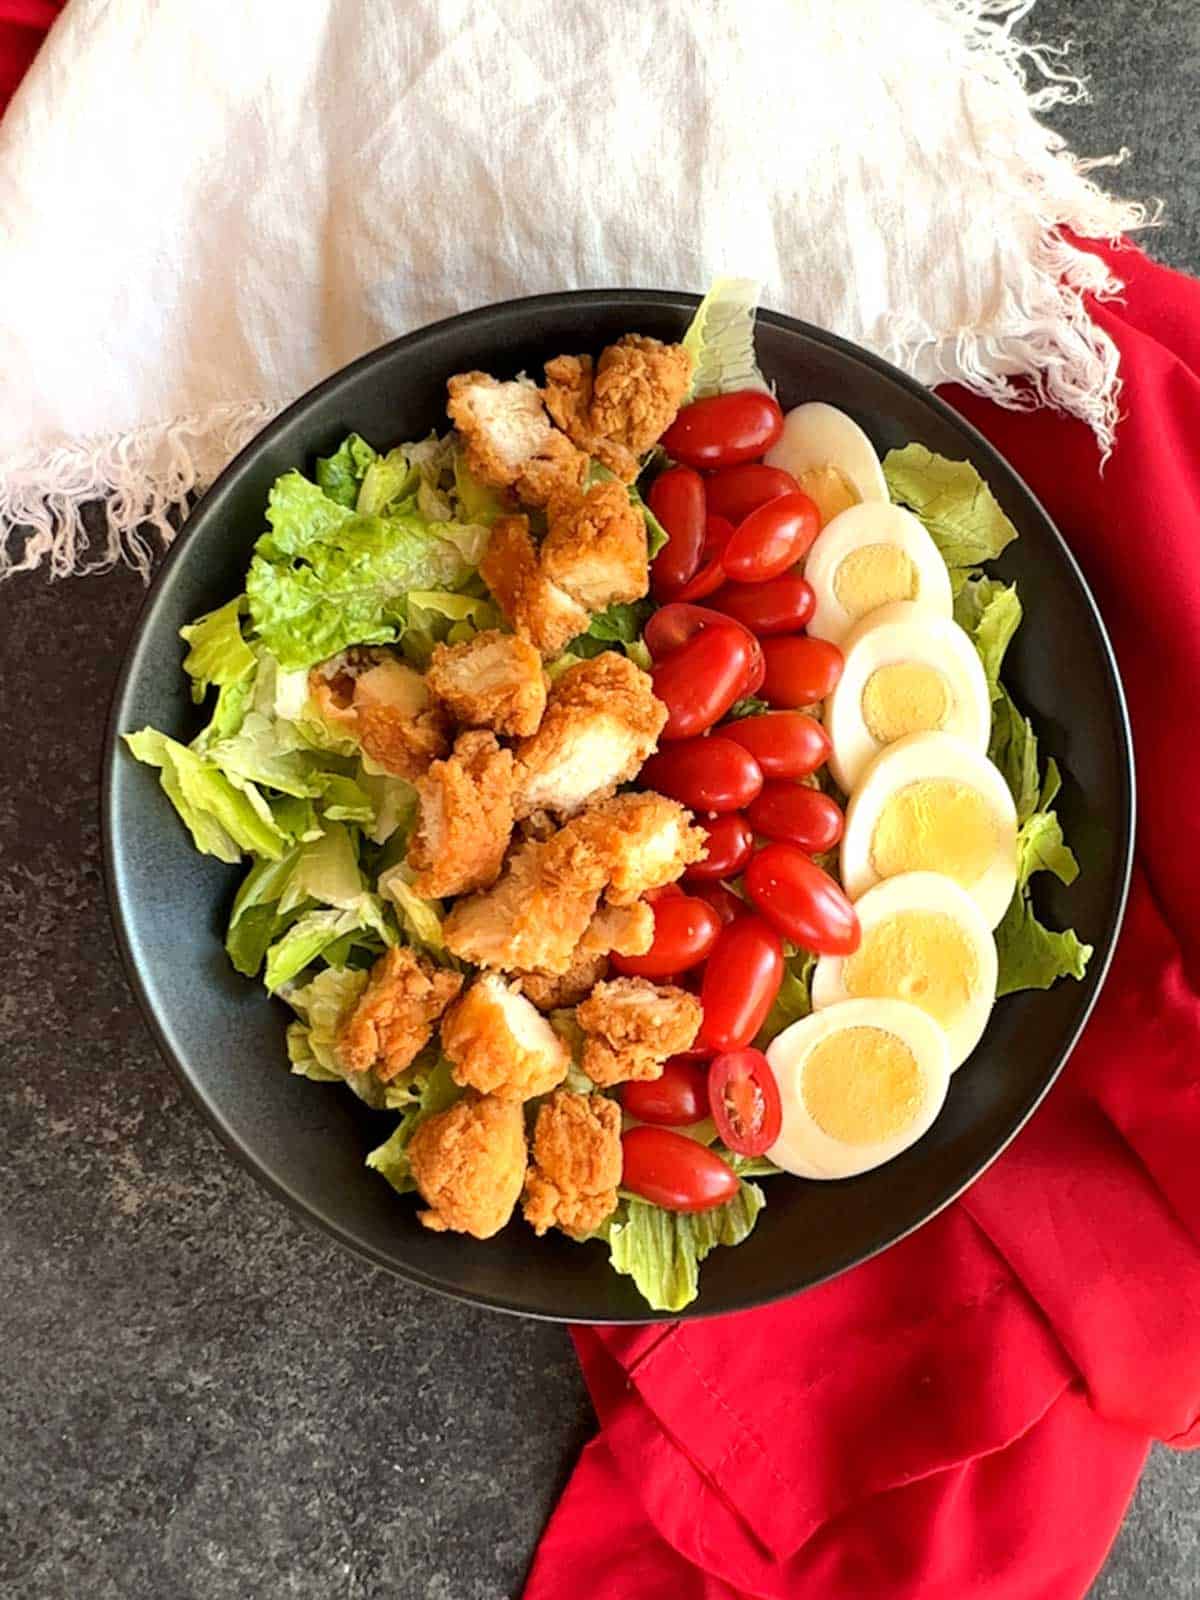 Fried chicken strip cut into pieces added to the salad.